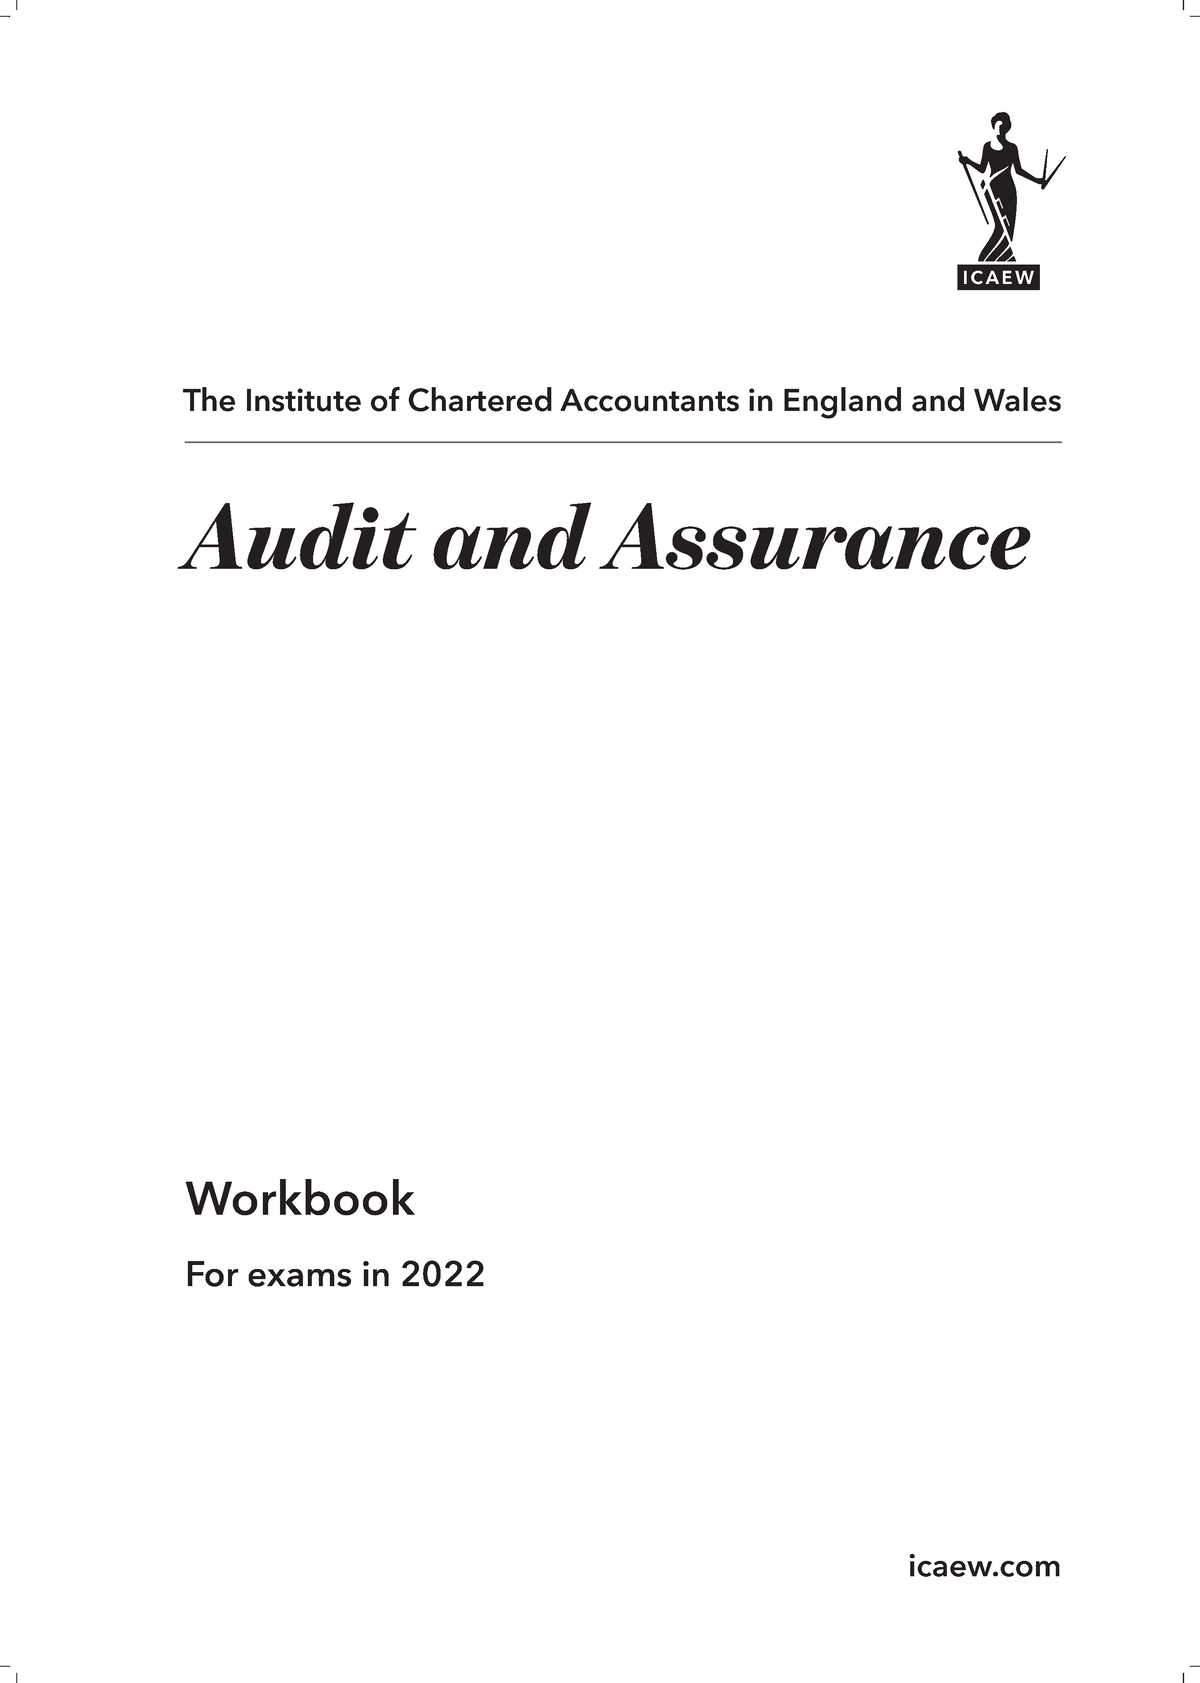 Audit and Assurance AA Workbook 2022 Sample - Audit and Assurance The ...